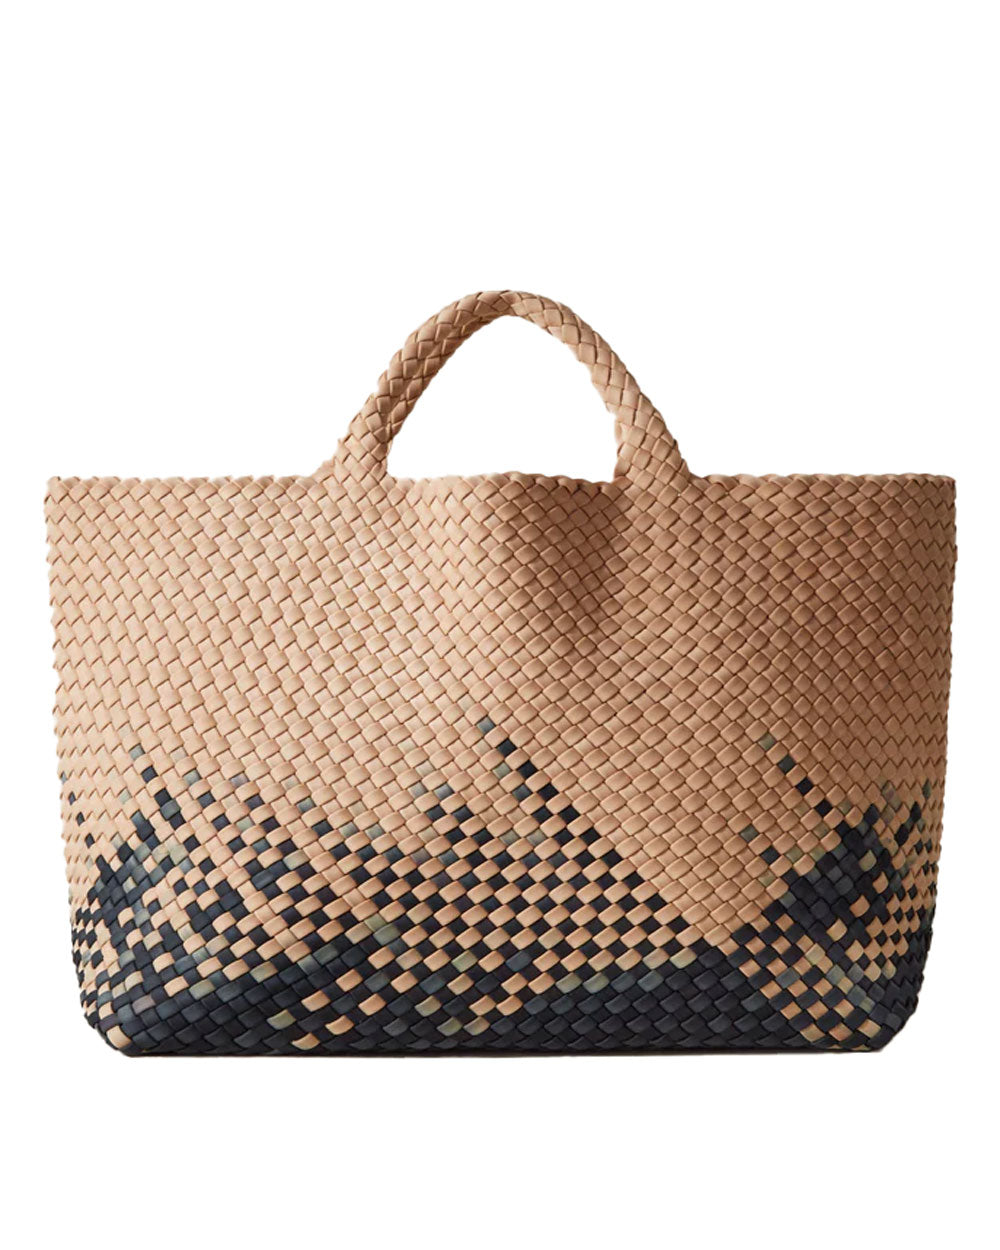 St. Barths Large Tote in Paz